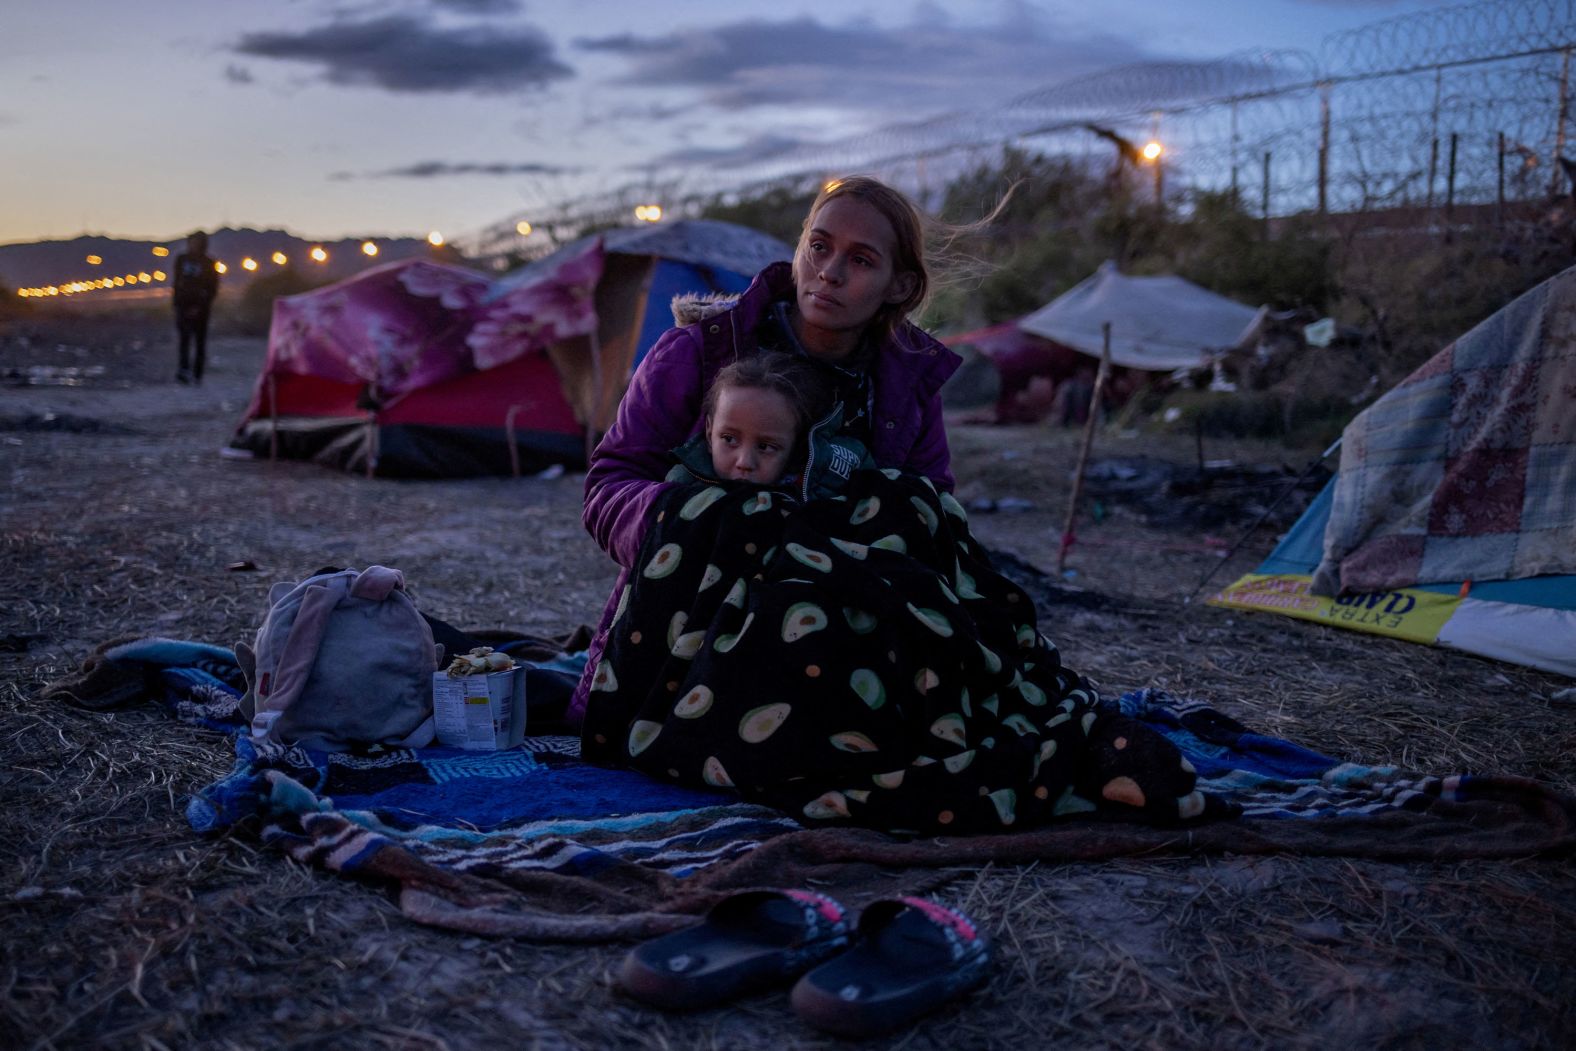 Melani, a 22-year-old migrant from Venezuela, stares at a fire as she covers her 3-year-old son, Angel, with a blanket at the US-Mexico border near El Paso, Texas, on Monday, April 1.